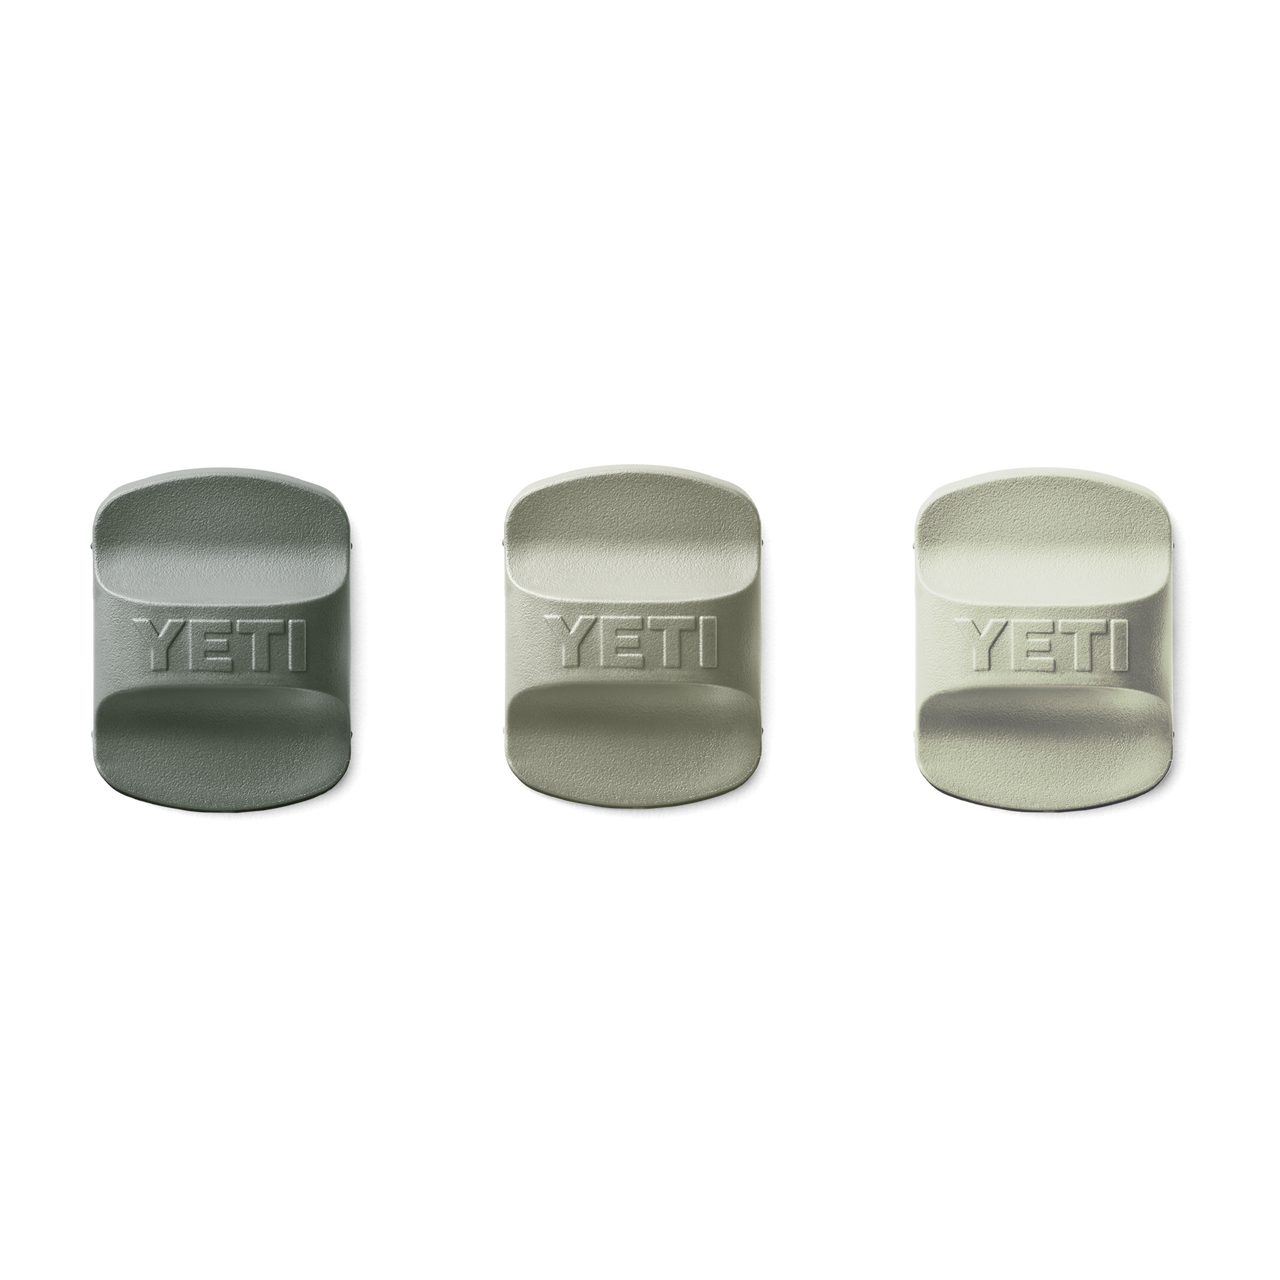 For yeti magnetic slider replacement, for yeti lid